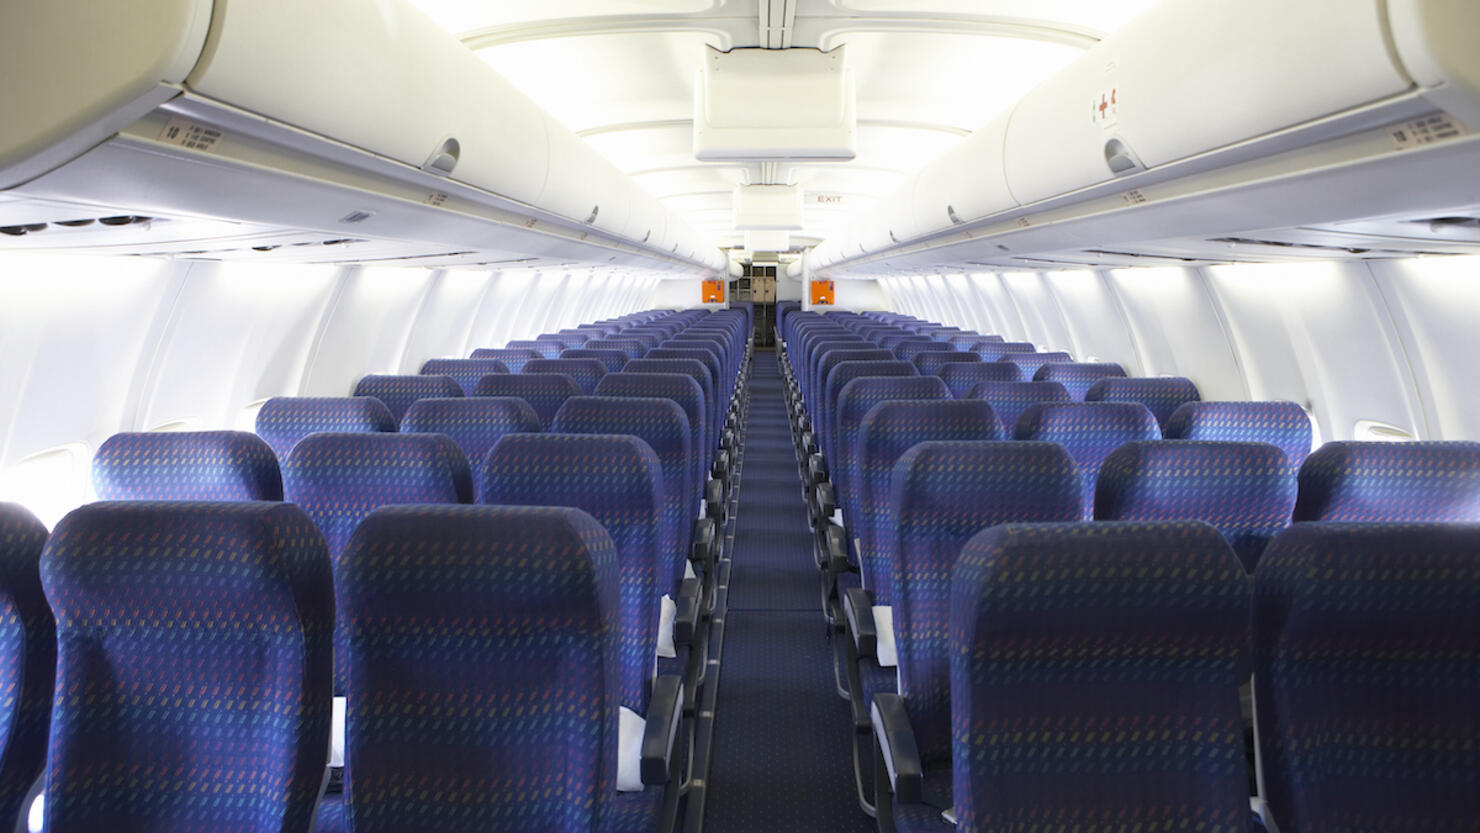 Rows of empty seats on airplane